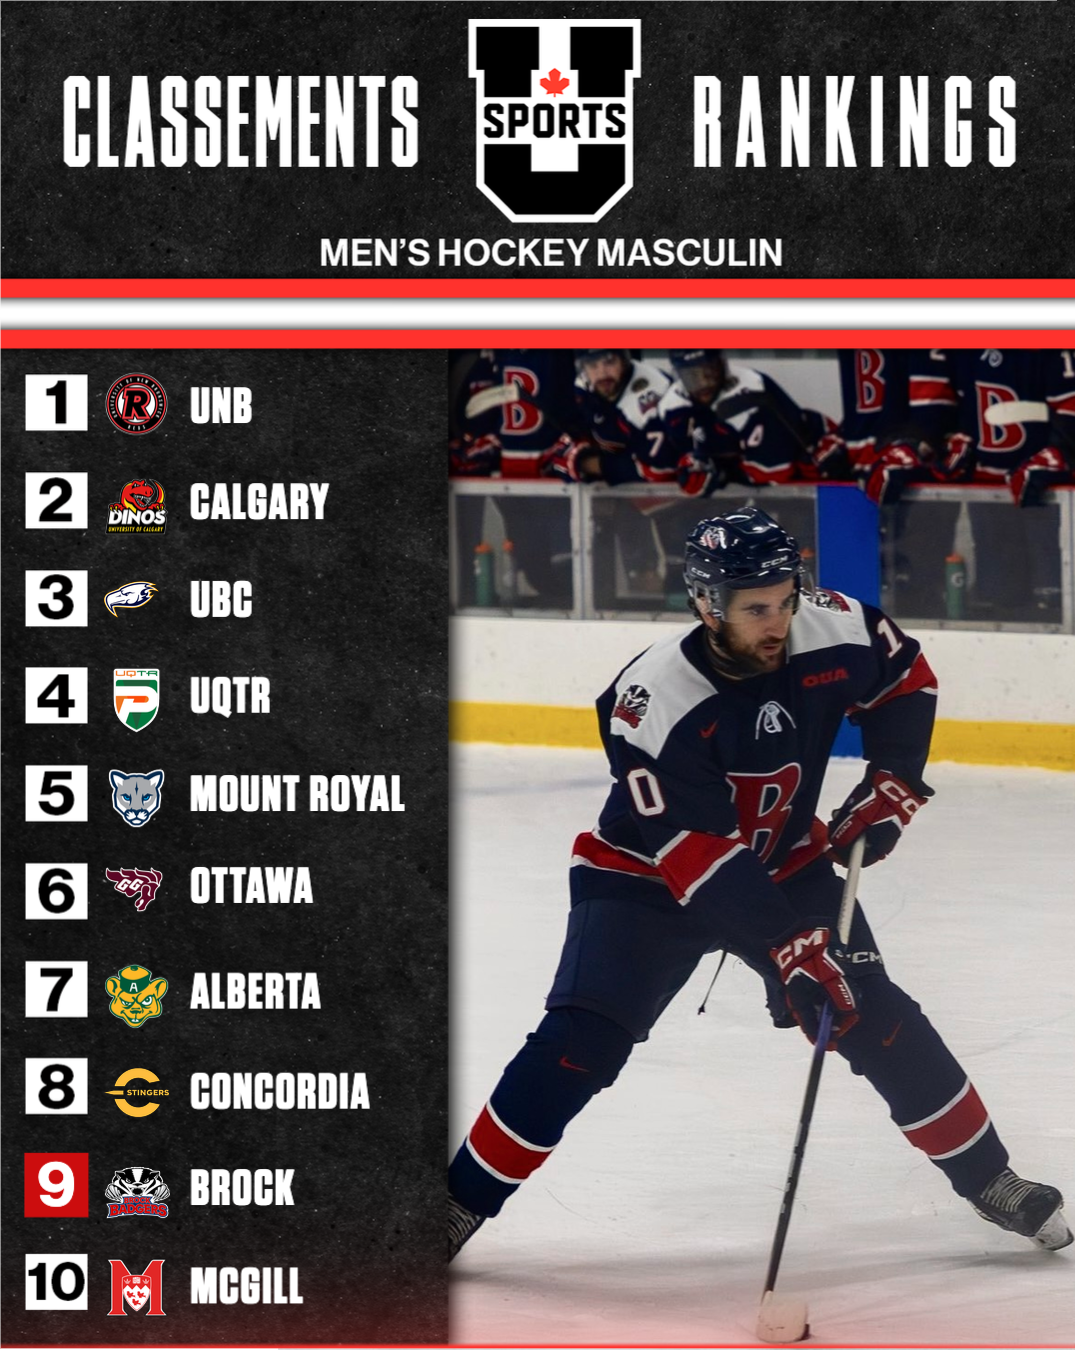 MHKY_TOP_10_(1).png (1.62 MB)